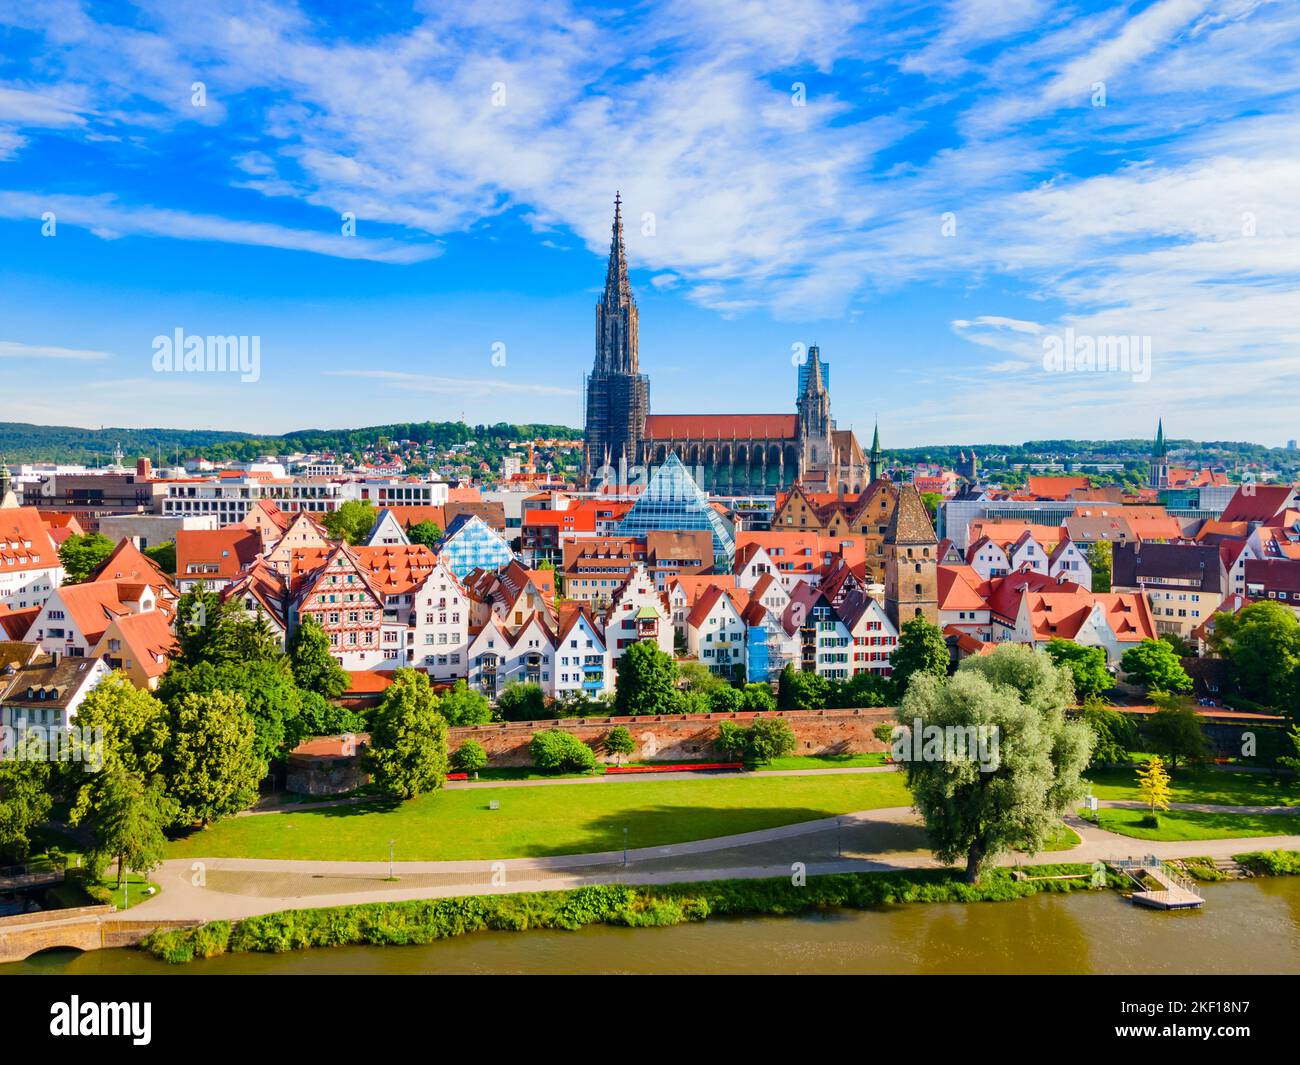 Ulm Minster or Ulmer Munster Cathedral aerial panoramic view, a Lutheran church located in Ulm, Germany. It is currently the tallest church in the wor Stock Photo